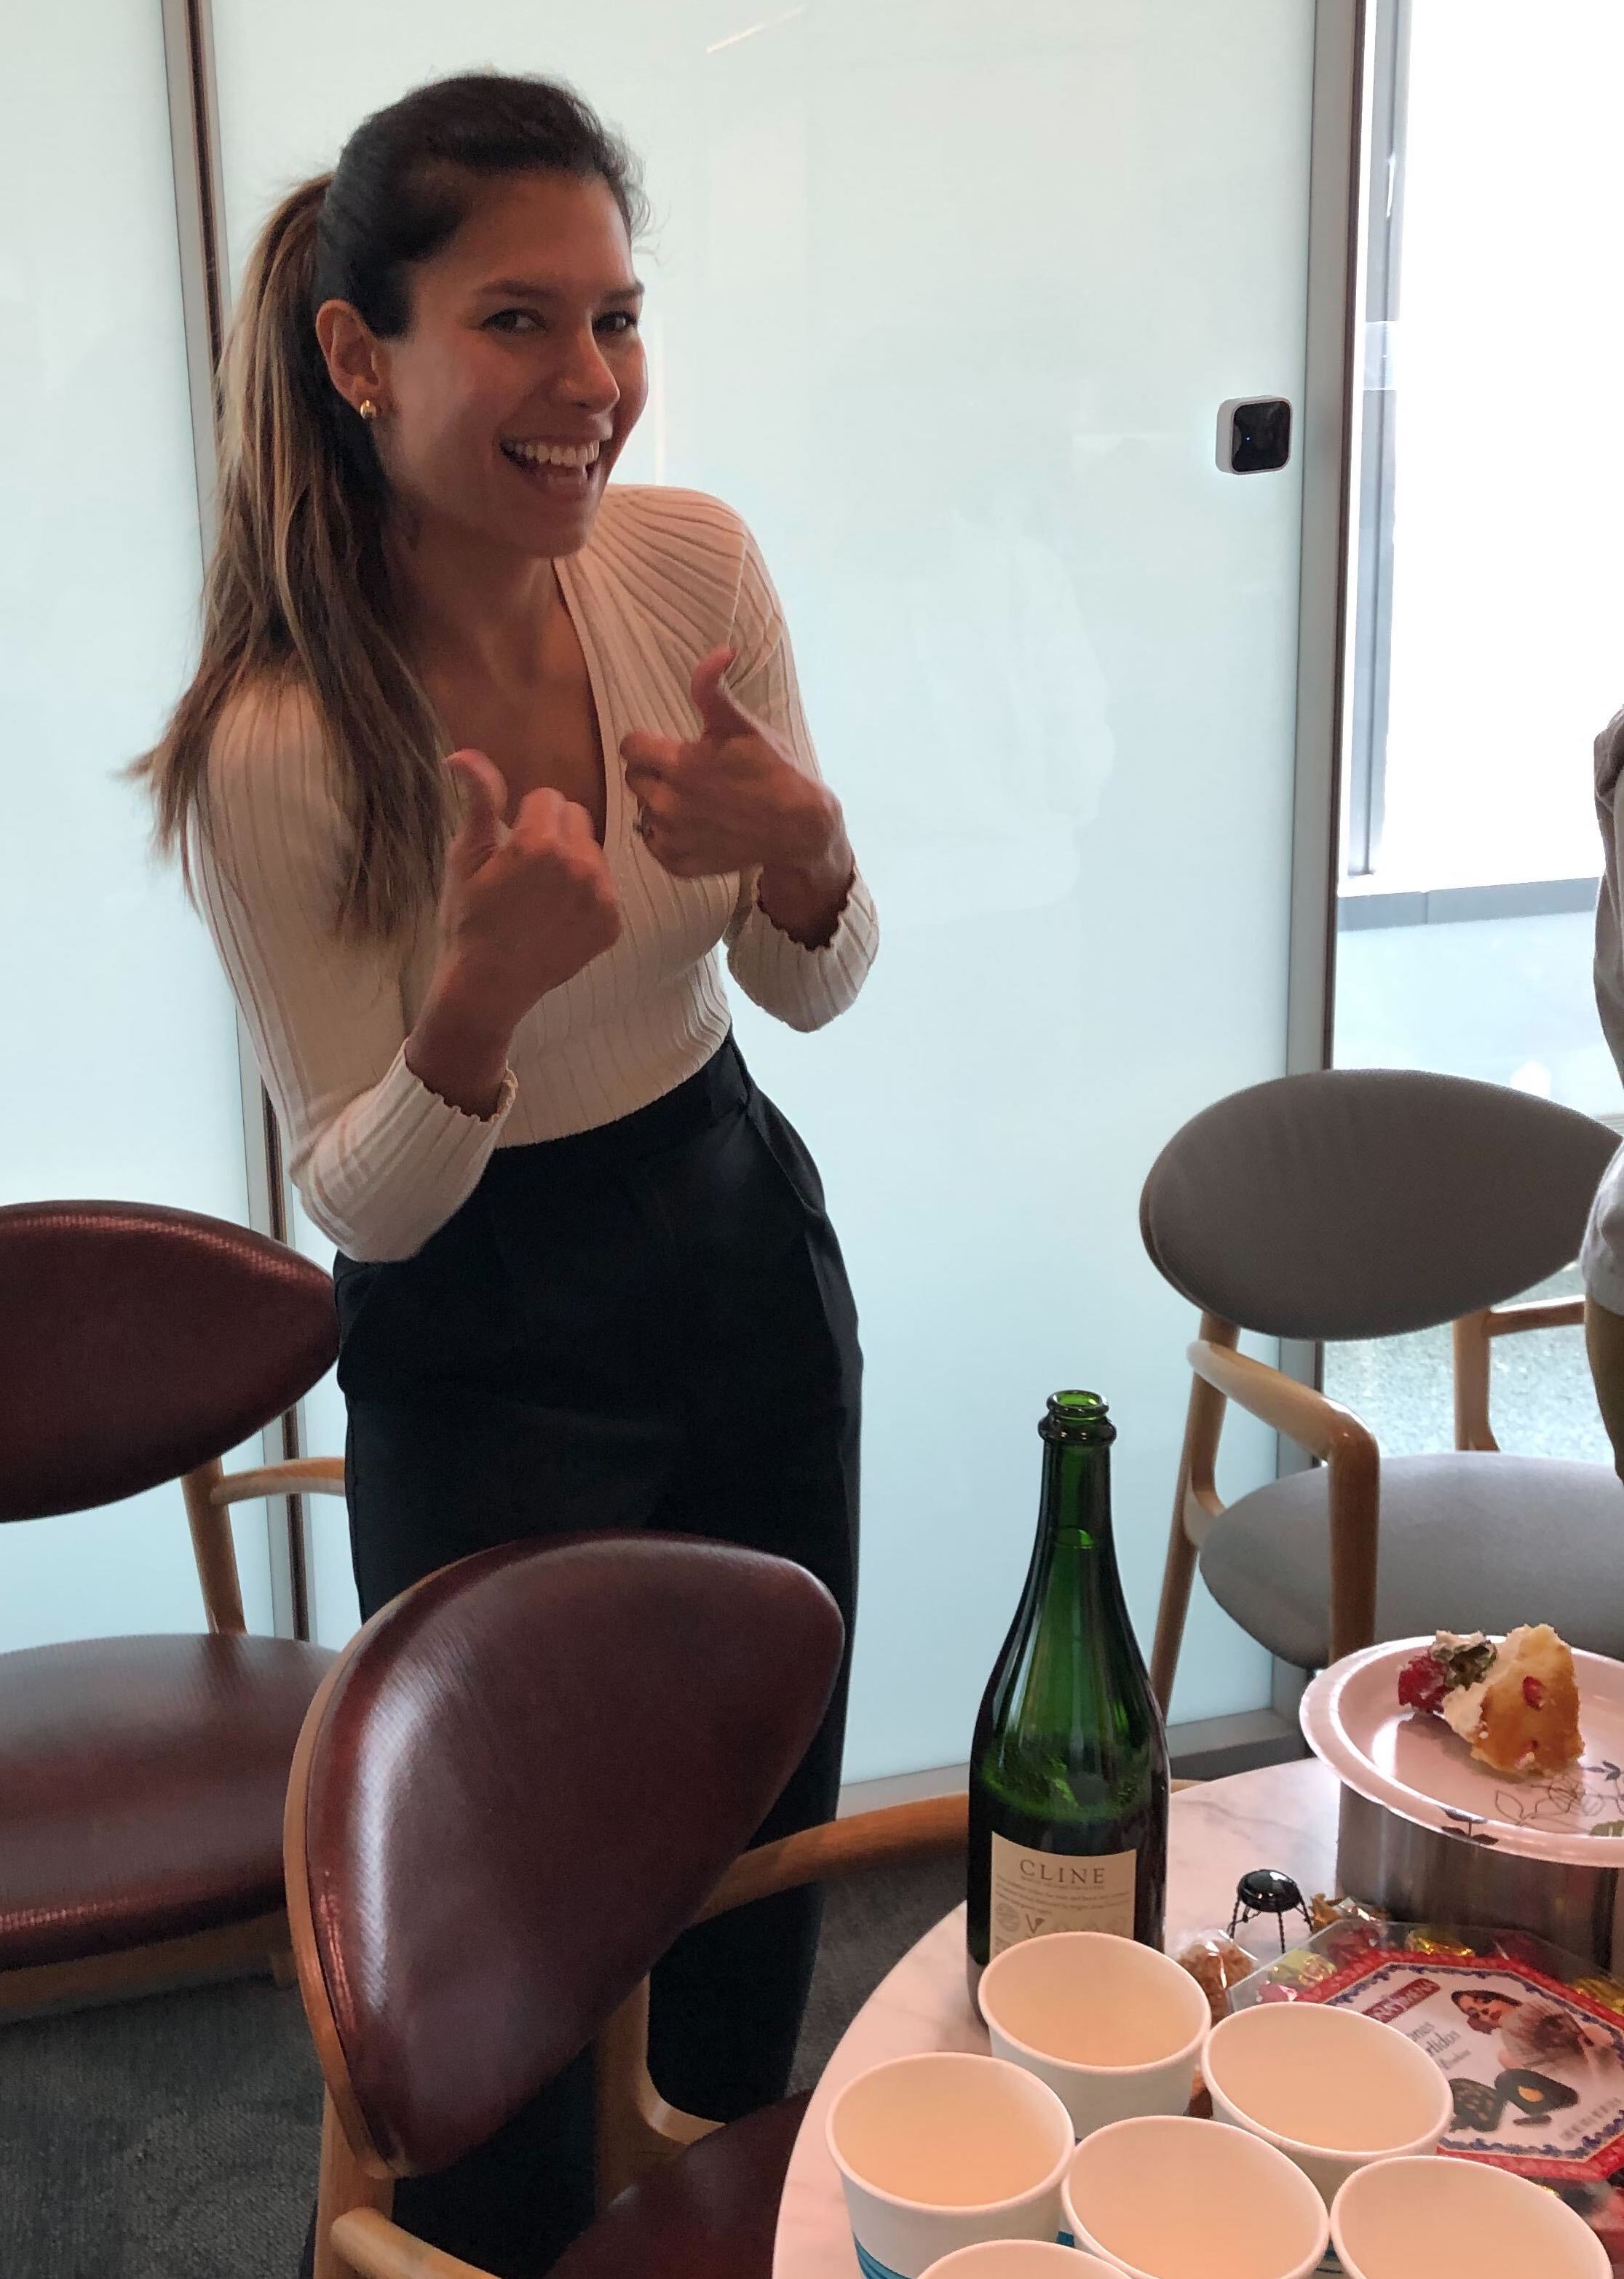 Liliana celebrating after passing her second level exam!